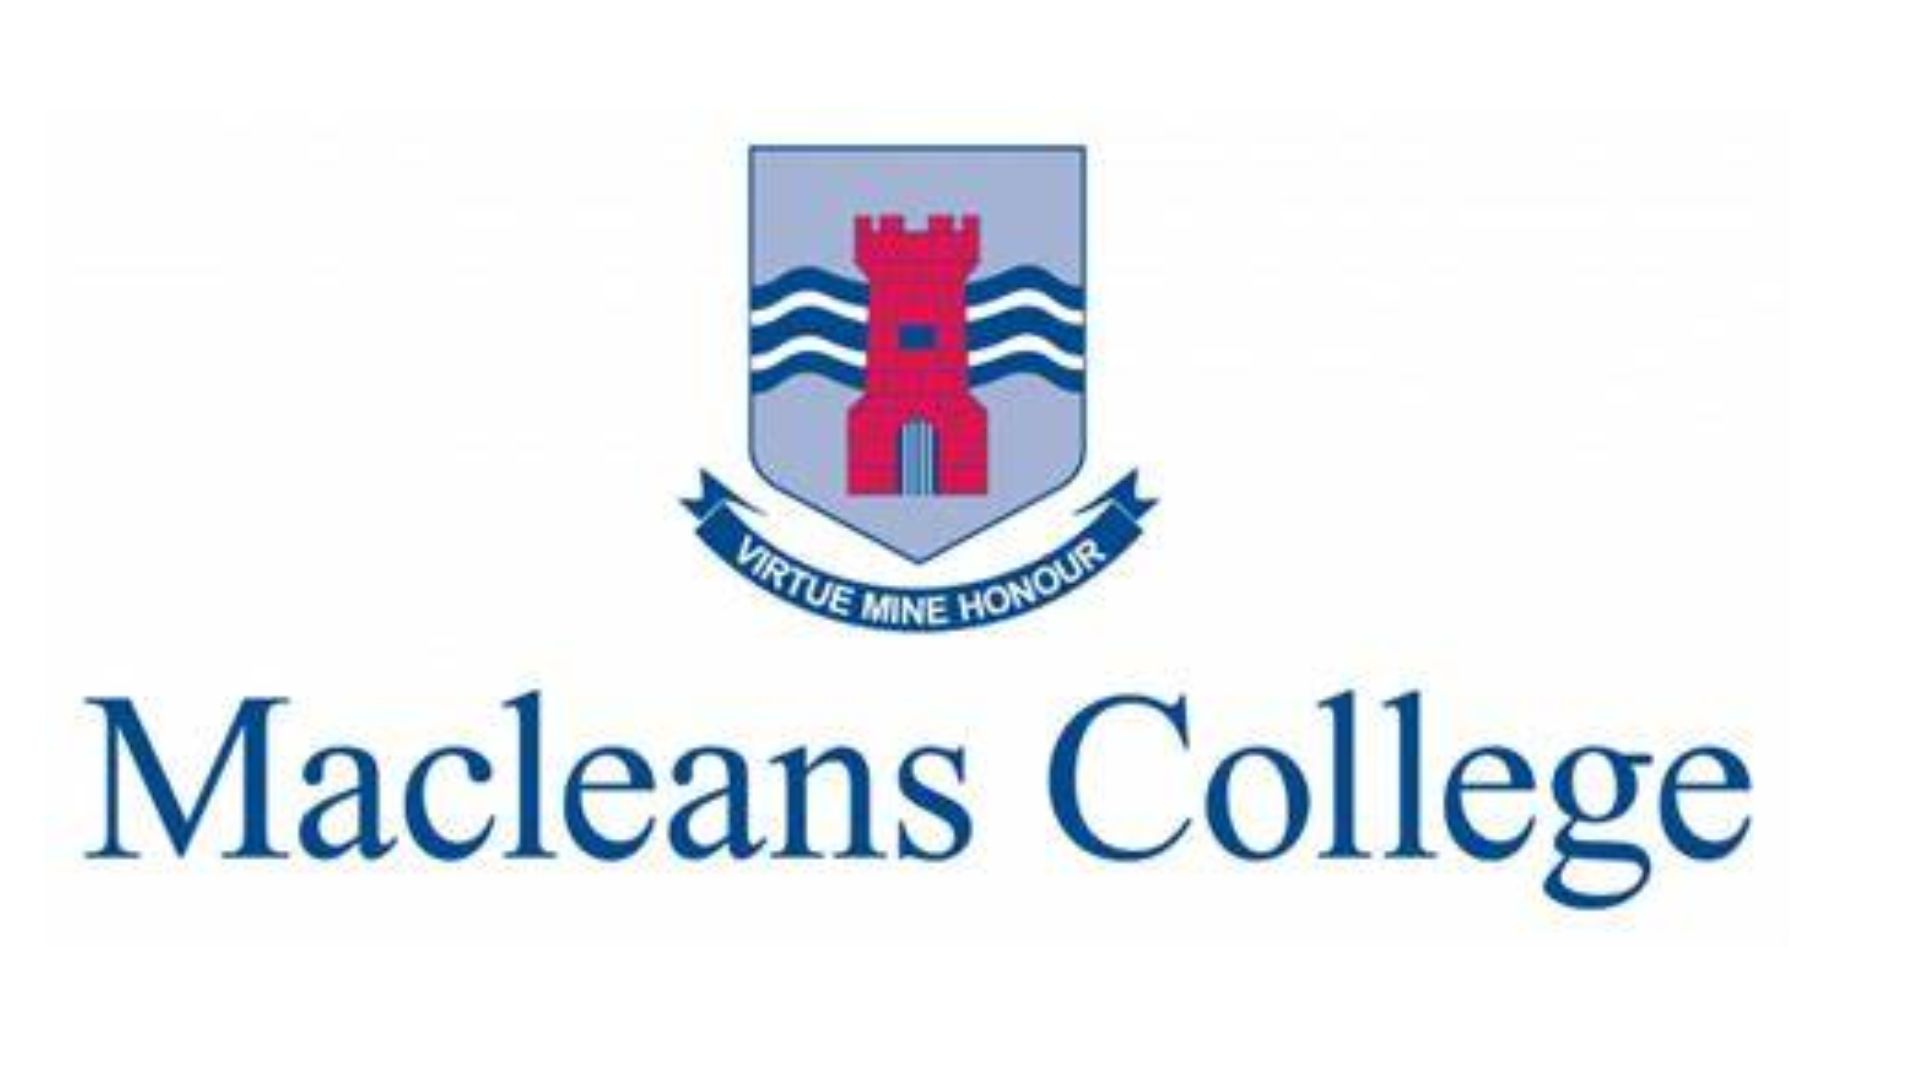 Macleans College マクリーンズ　カレッジ